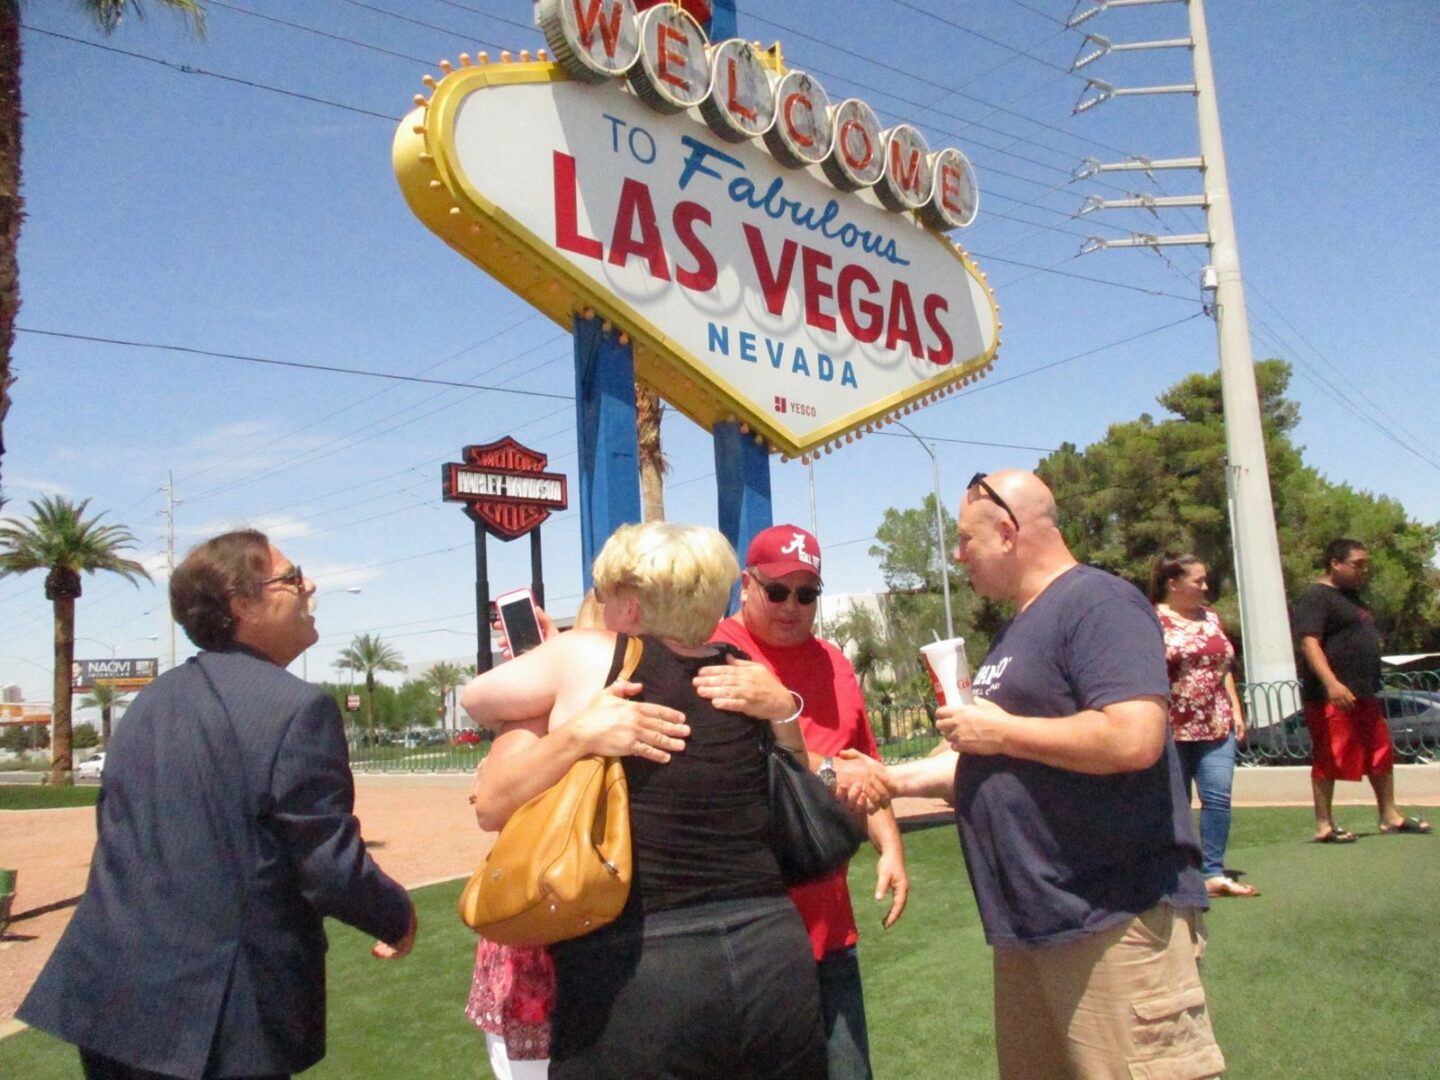 A group of people standing around in front of the welcome to fabulous las vegas sign.